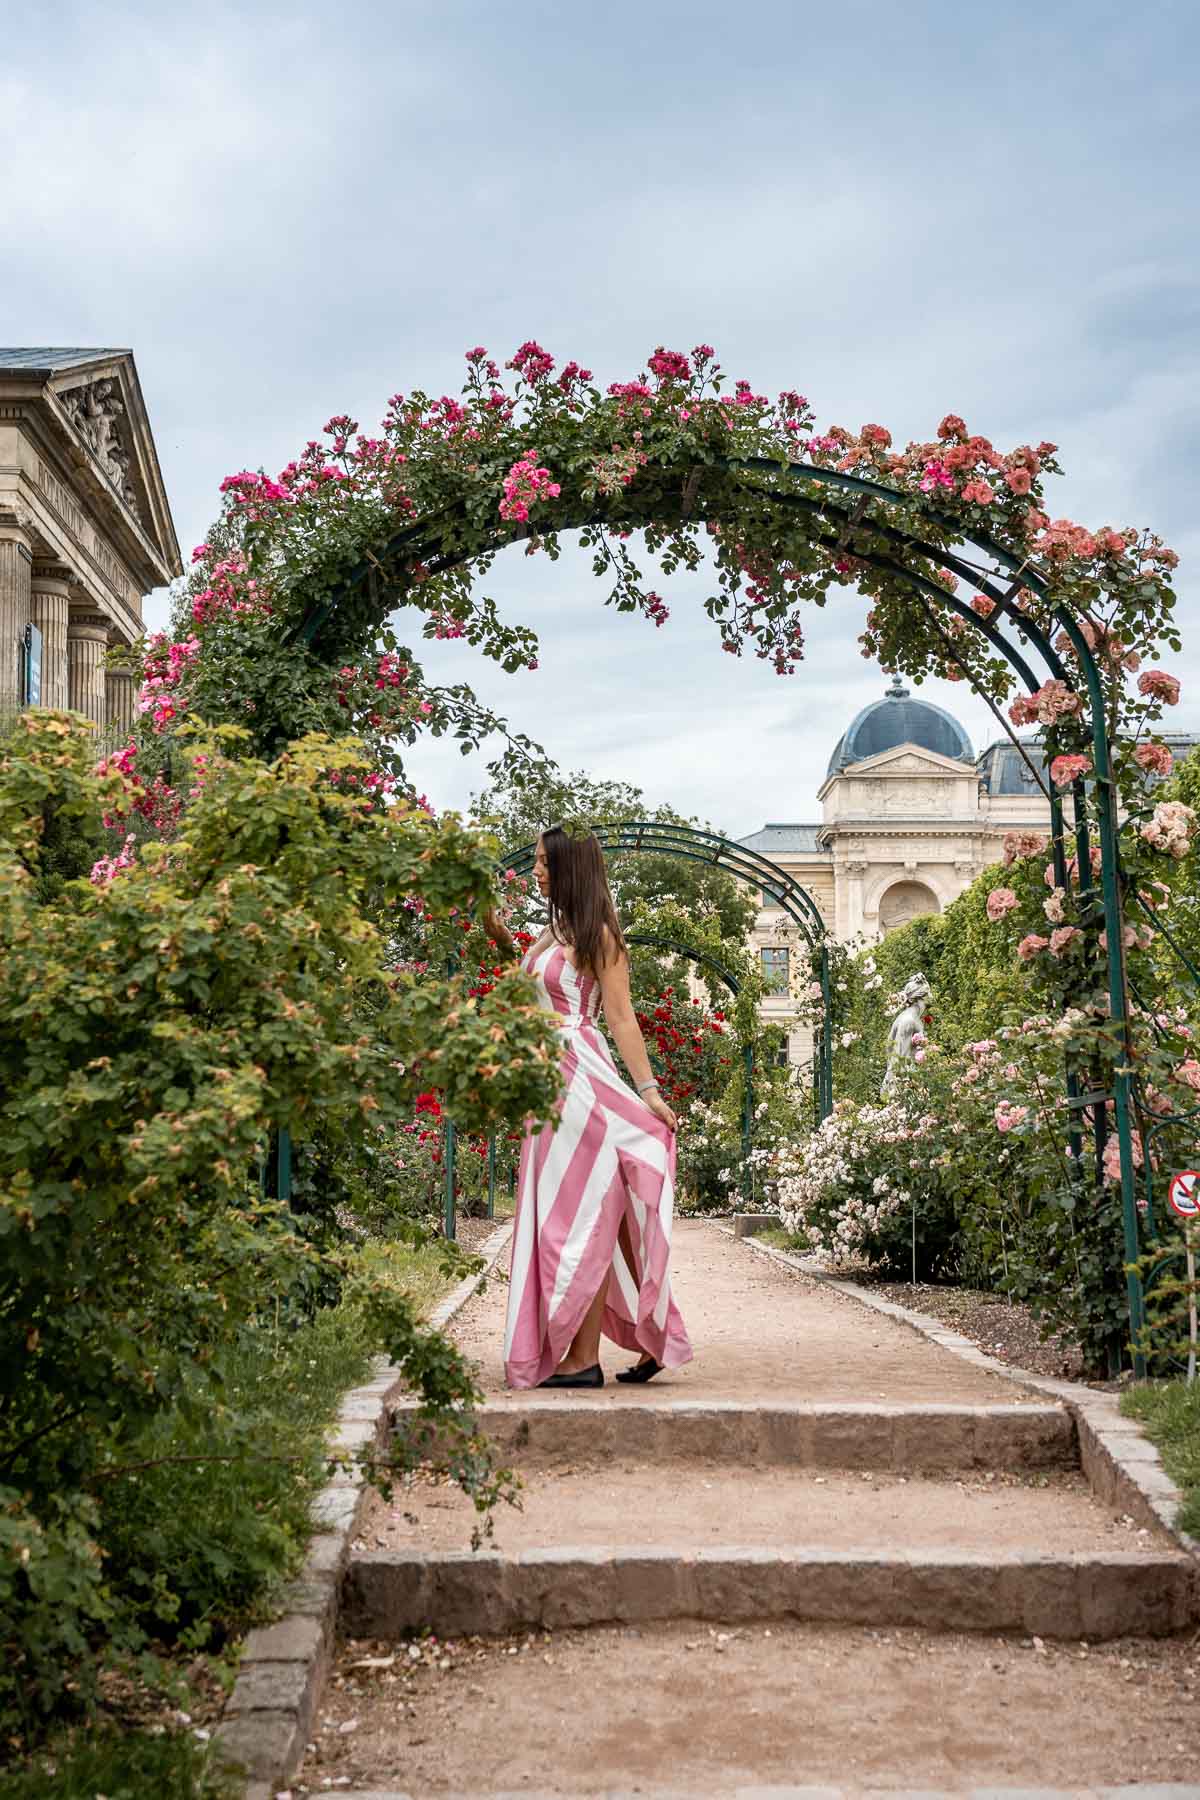 Girl in a pink-white striped dress standing under an archway of roses at Jardin des Plantes in Paris, France